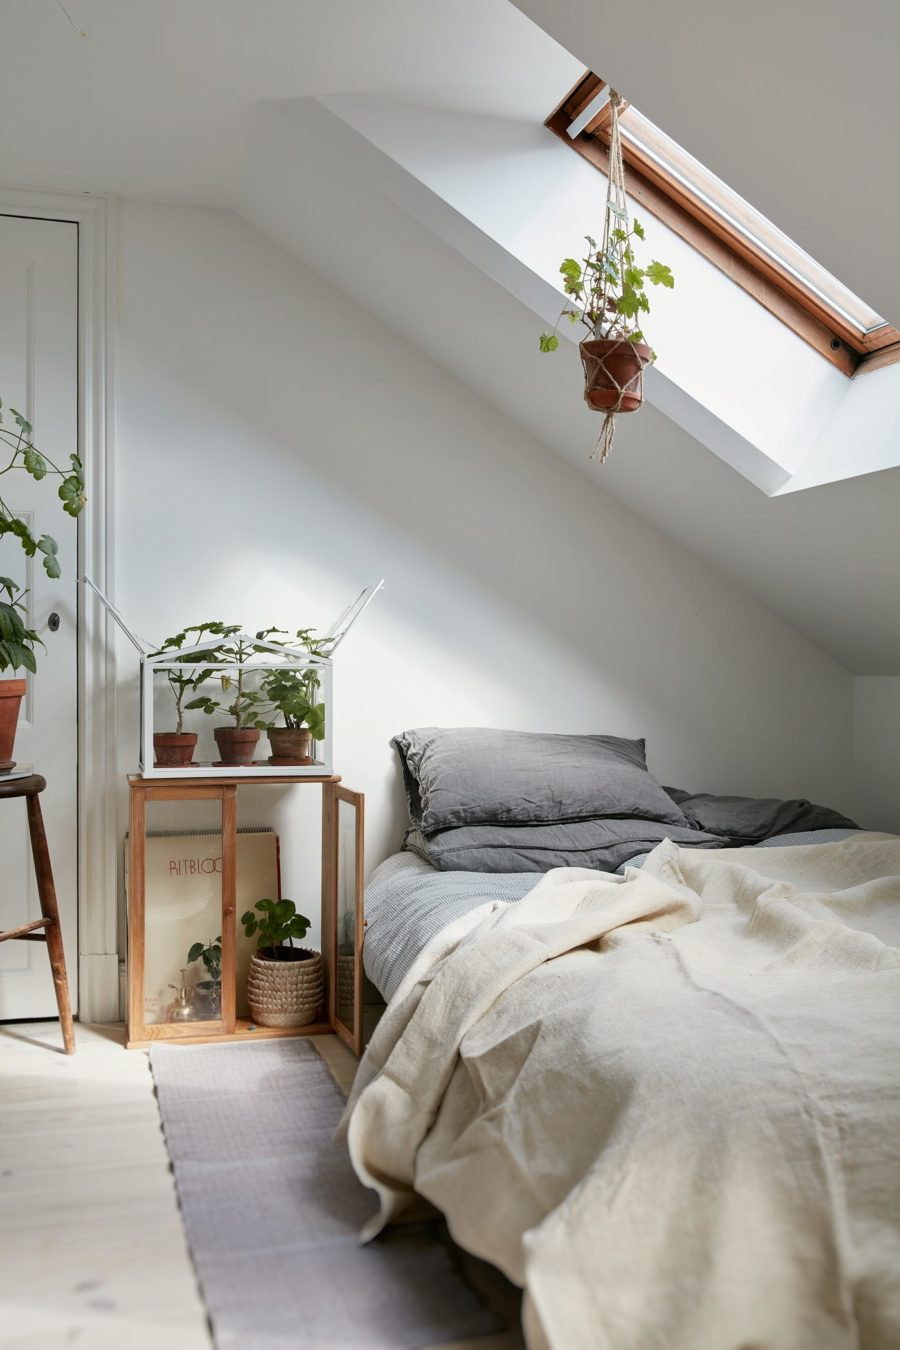 Small Plants For Bedroom
 40 Simple and Chic Minimalist Bedrooms